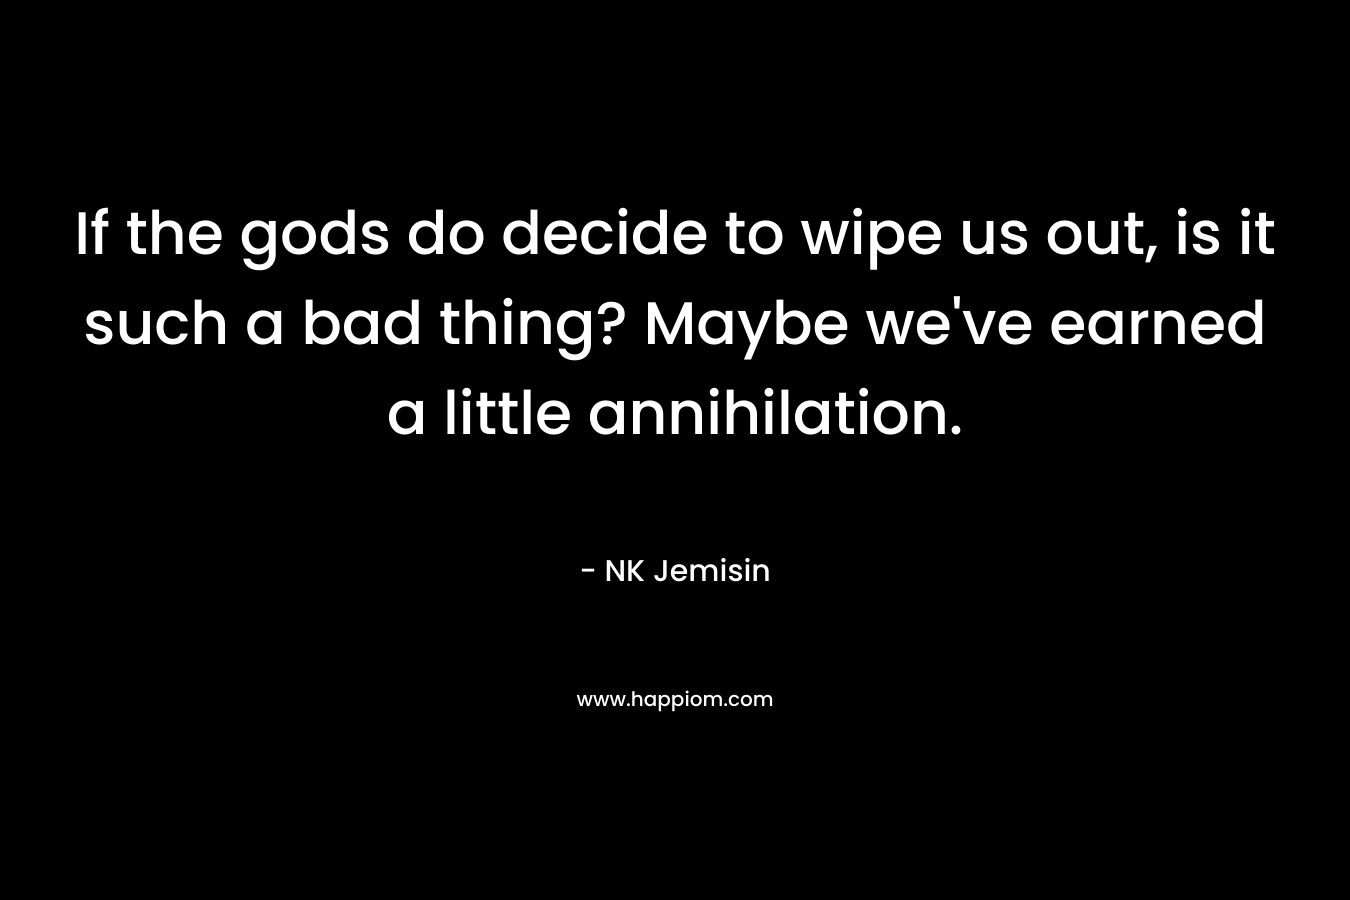 If the gods do decide to wipe us out, is it such a bad thing? Maybe we’ve earned a little annihilation. – NK Jemisin